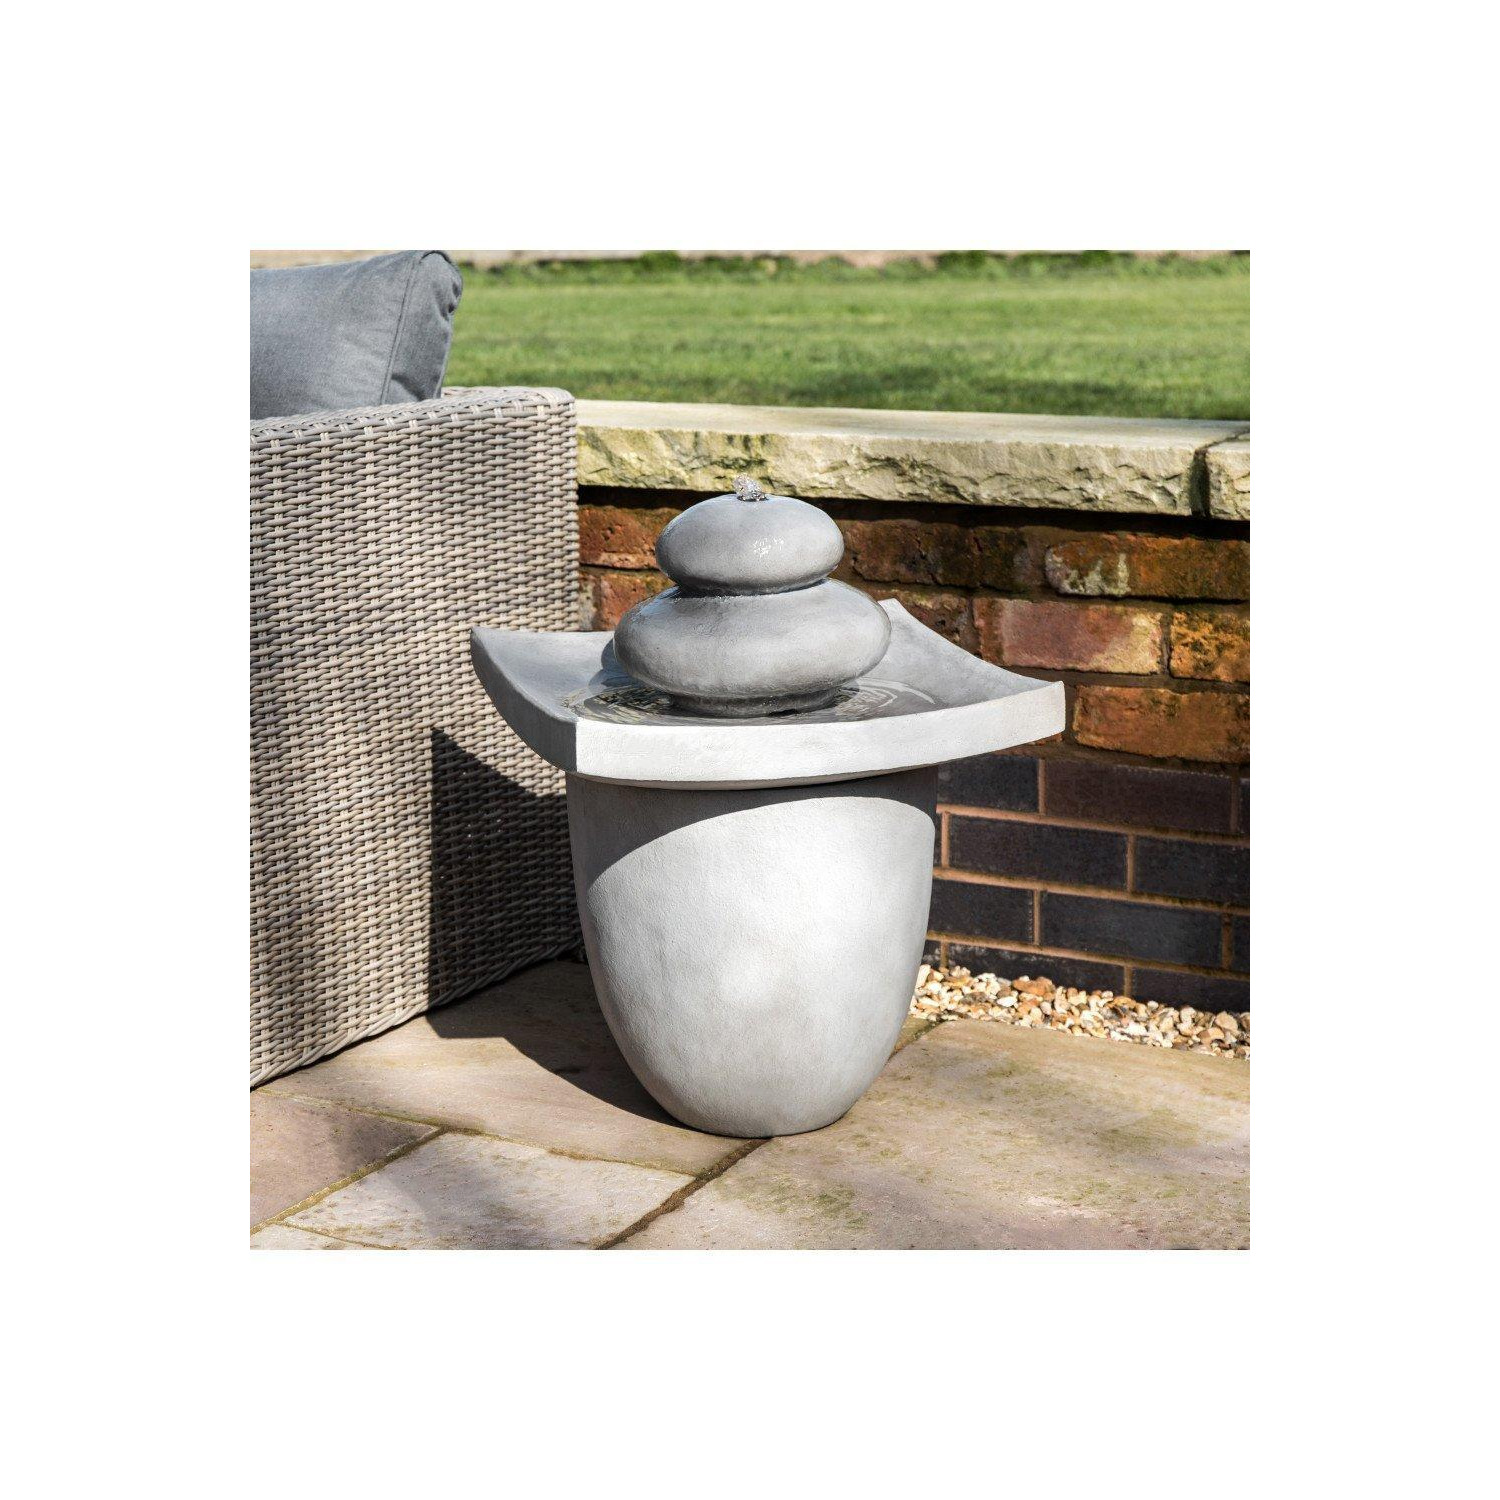 Garden Water Feature With Lights, Outdoor 2 Tier  Basin Water Fountain - image 1